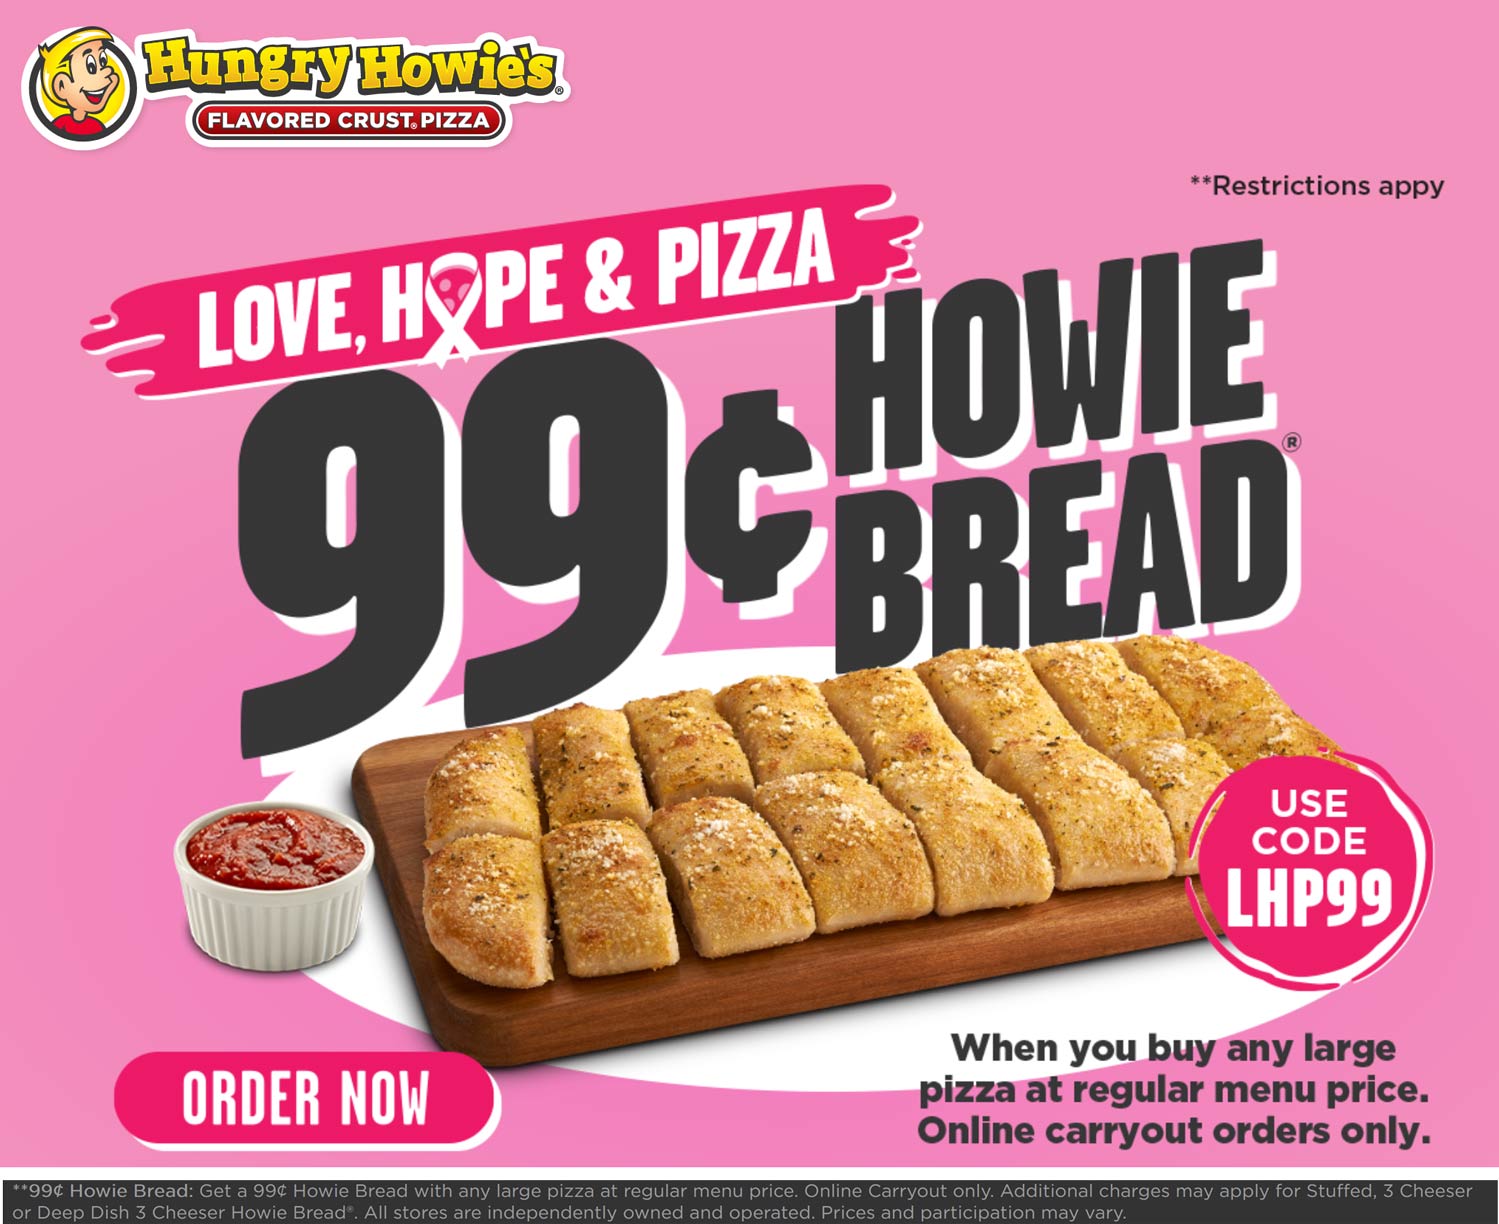 Hungry Howies restaurants Coupon  $1 garlic bread with your pizza today at Hungry Howies via promo code LHP99 #hungryhowies 